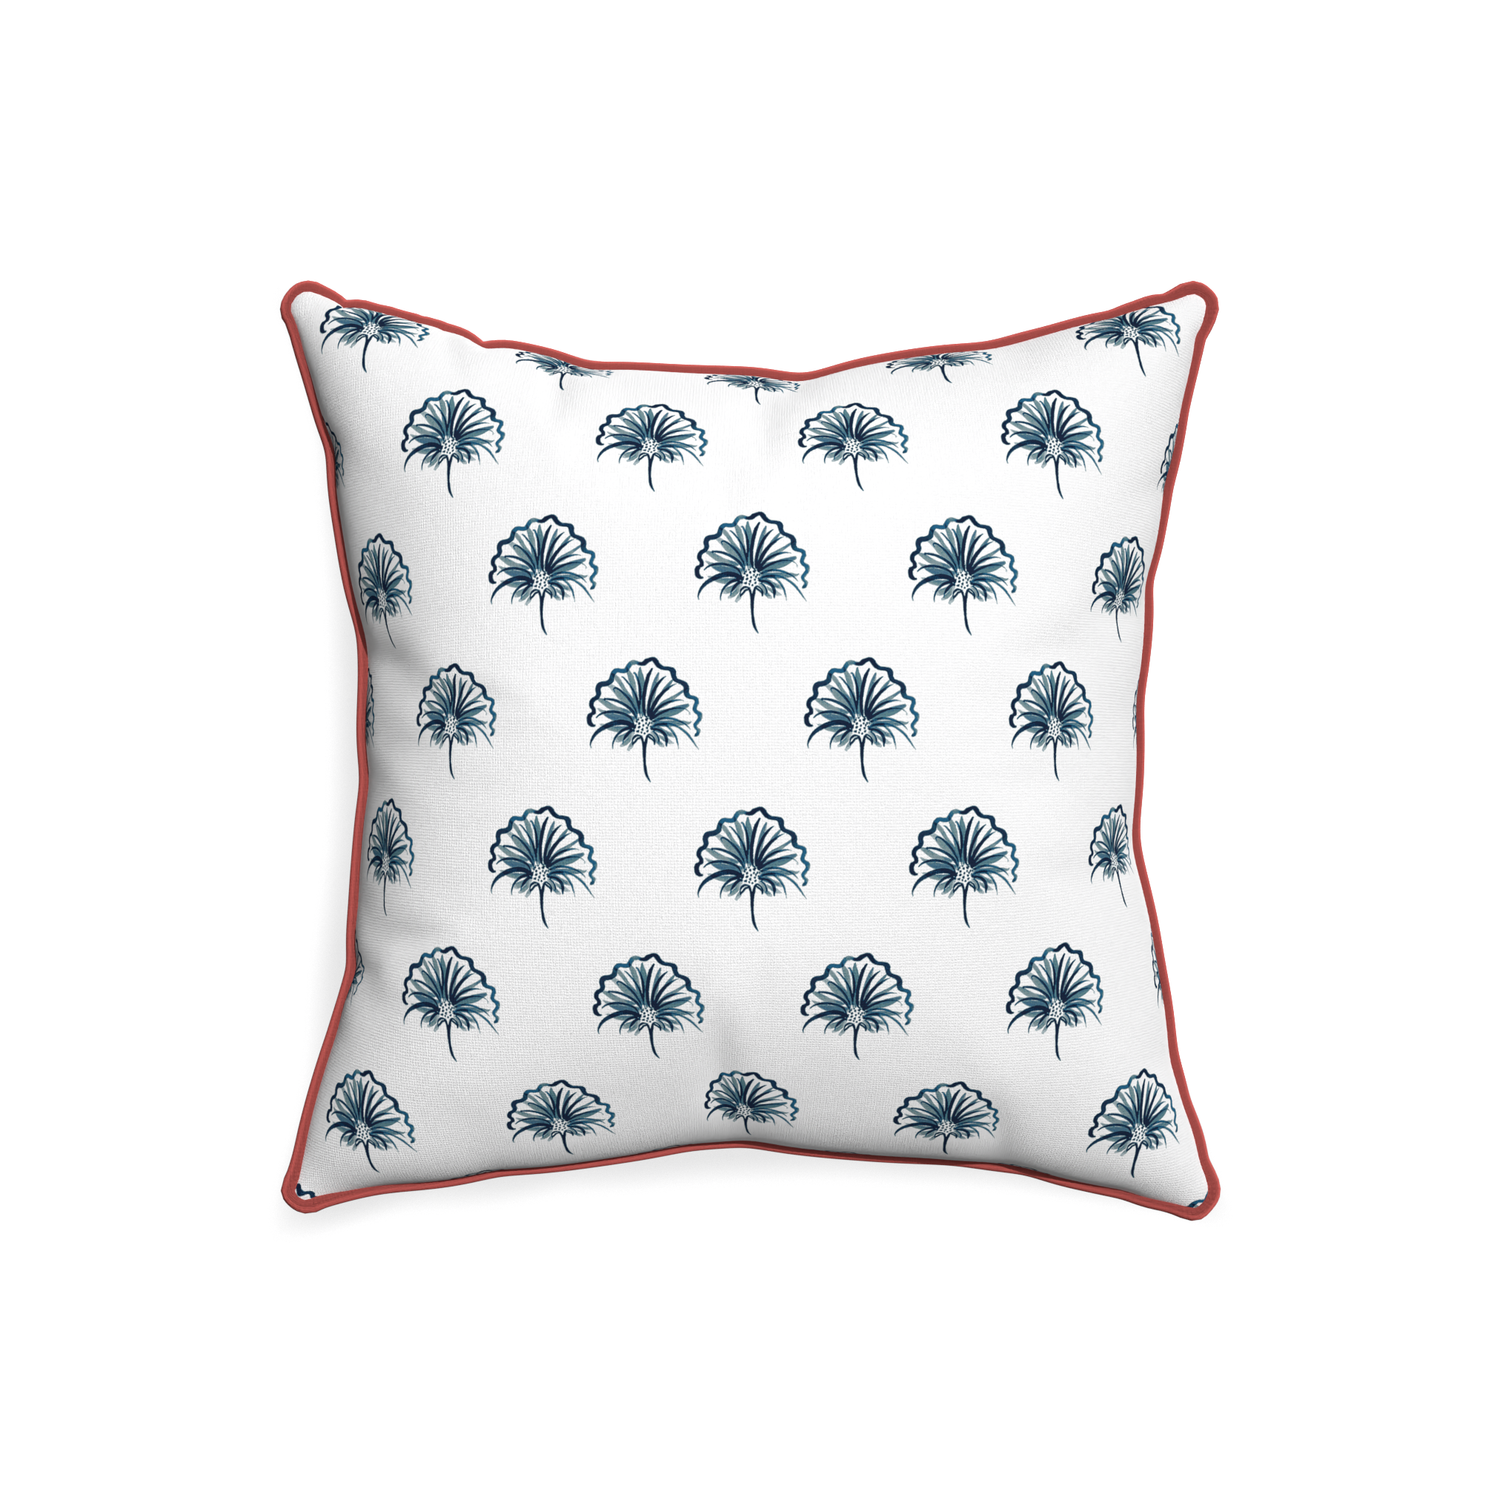 20-square penelope midnight custom floral navypillow with c piping on white background